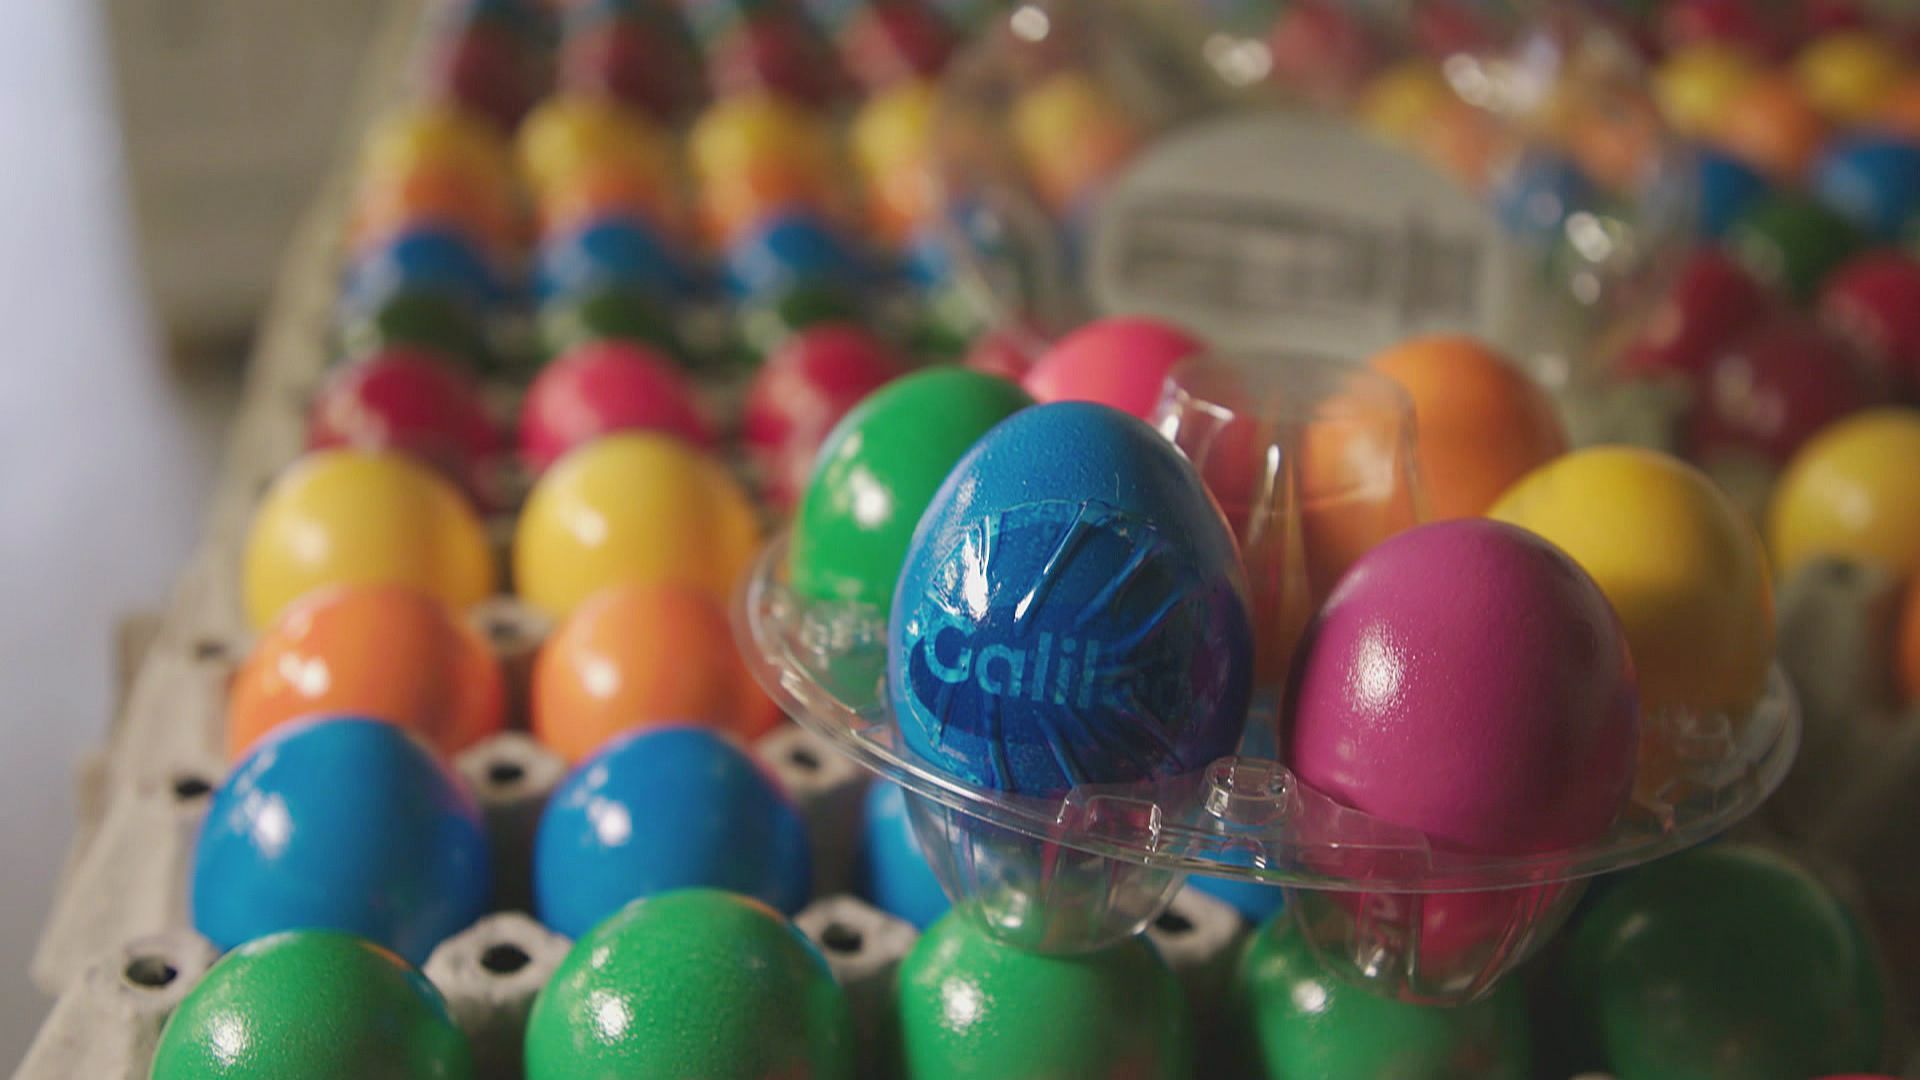 From the chicken coop to the Easter basket: The Easter egg factory